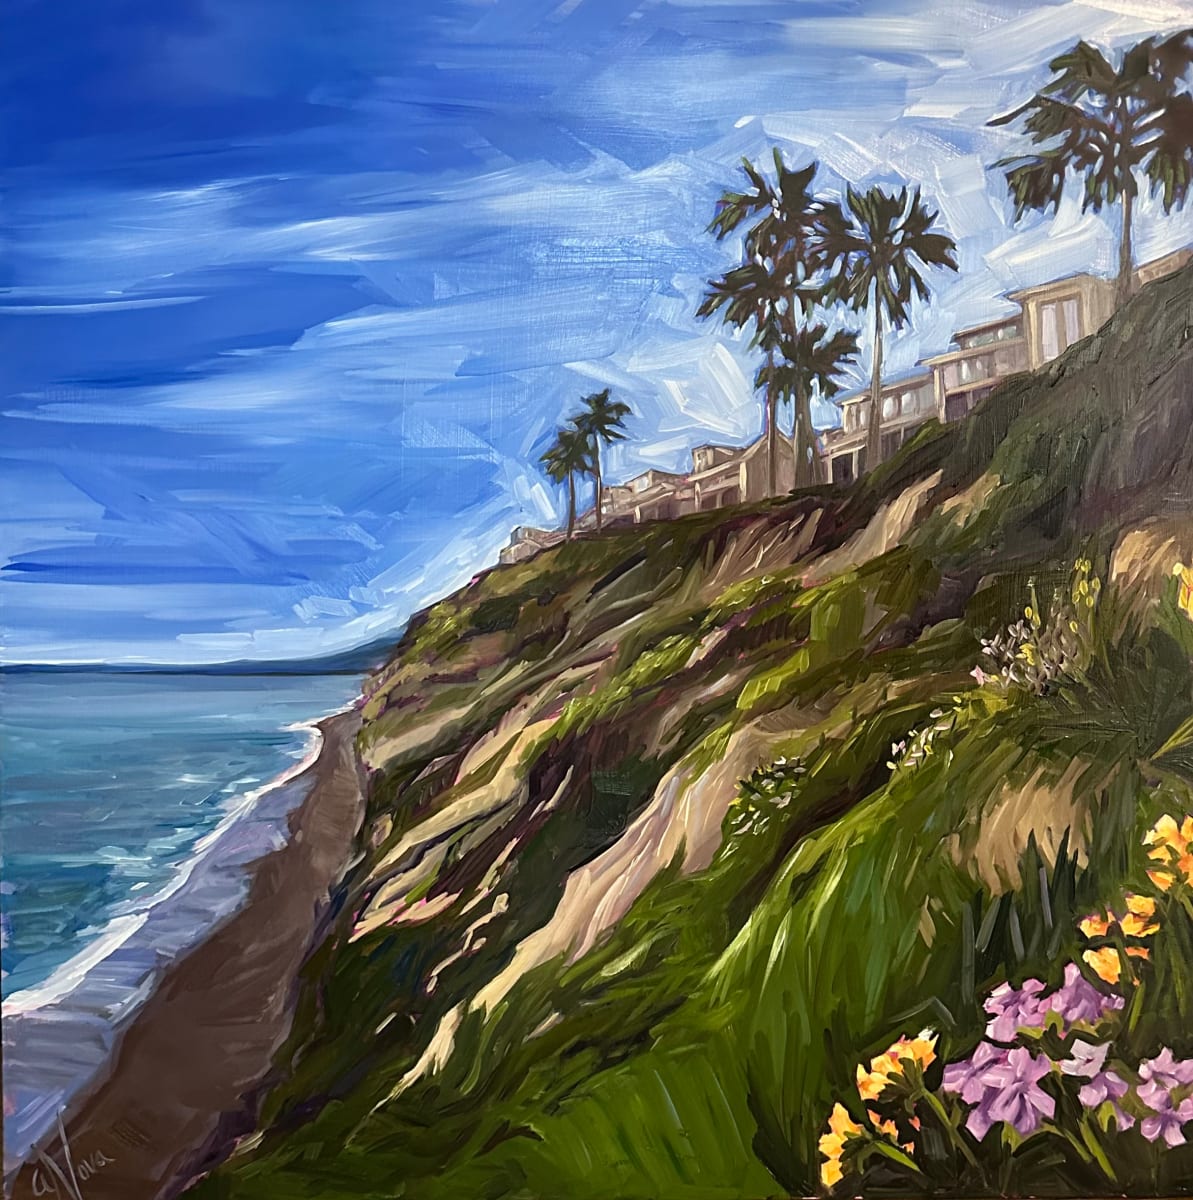 Grandview by Andrea Nova  Image: A view of the local surf spot, Grandview, in Encinitas, CA, looking North. This painting was created during a super bloom in Southern California, so I felt it was important to incorporate some nearby blossoms into the scene, even though they were not originally part of the view and original sketches.